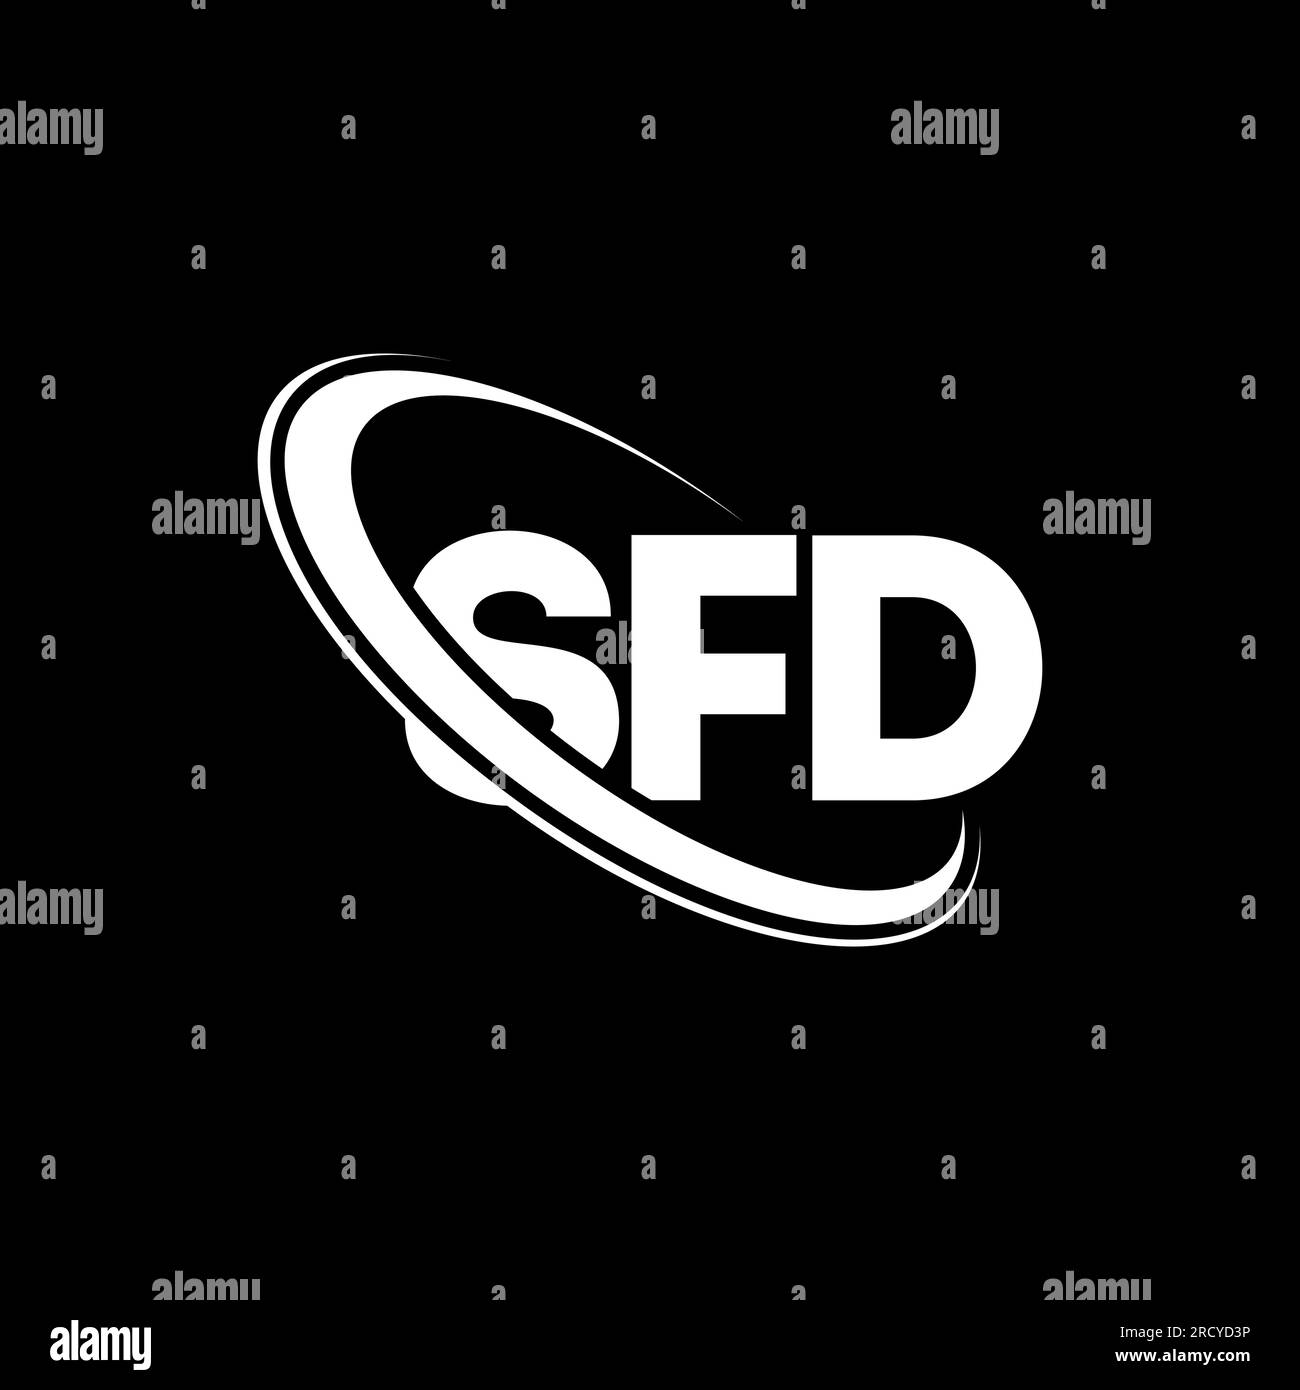 SFD logo. SFD letter. SFD letter logo design. Initials SFD logo linked with circle and uppercase monogram logo. SFD typography for technology, busines Stock Vector